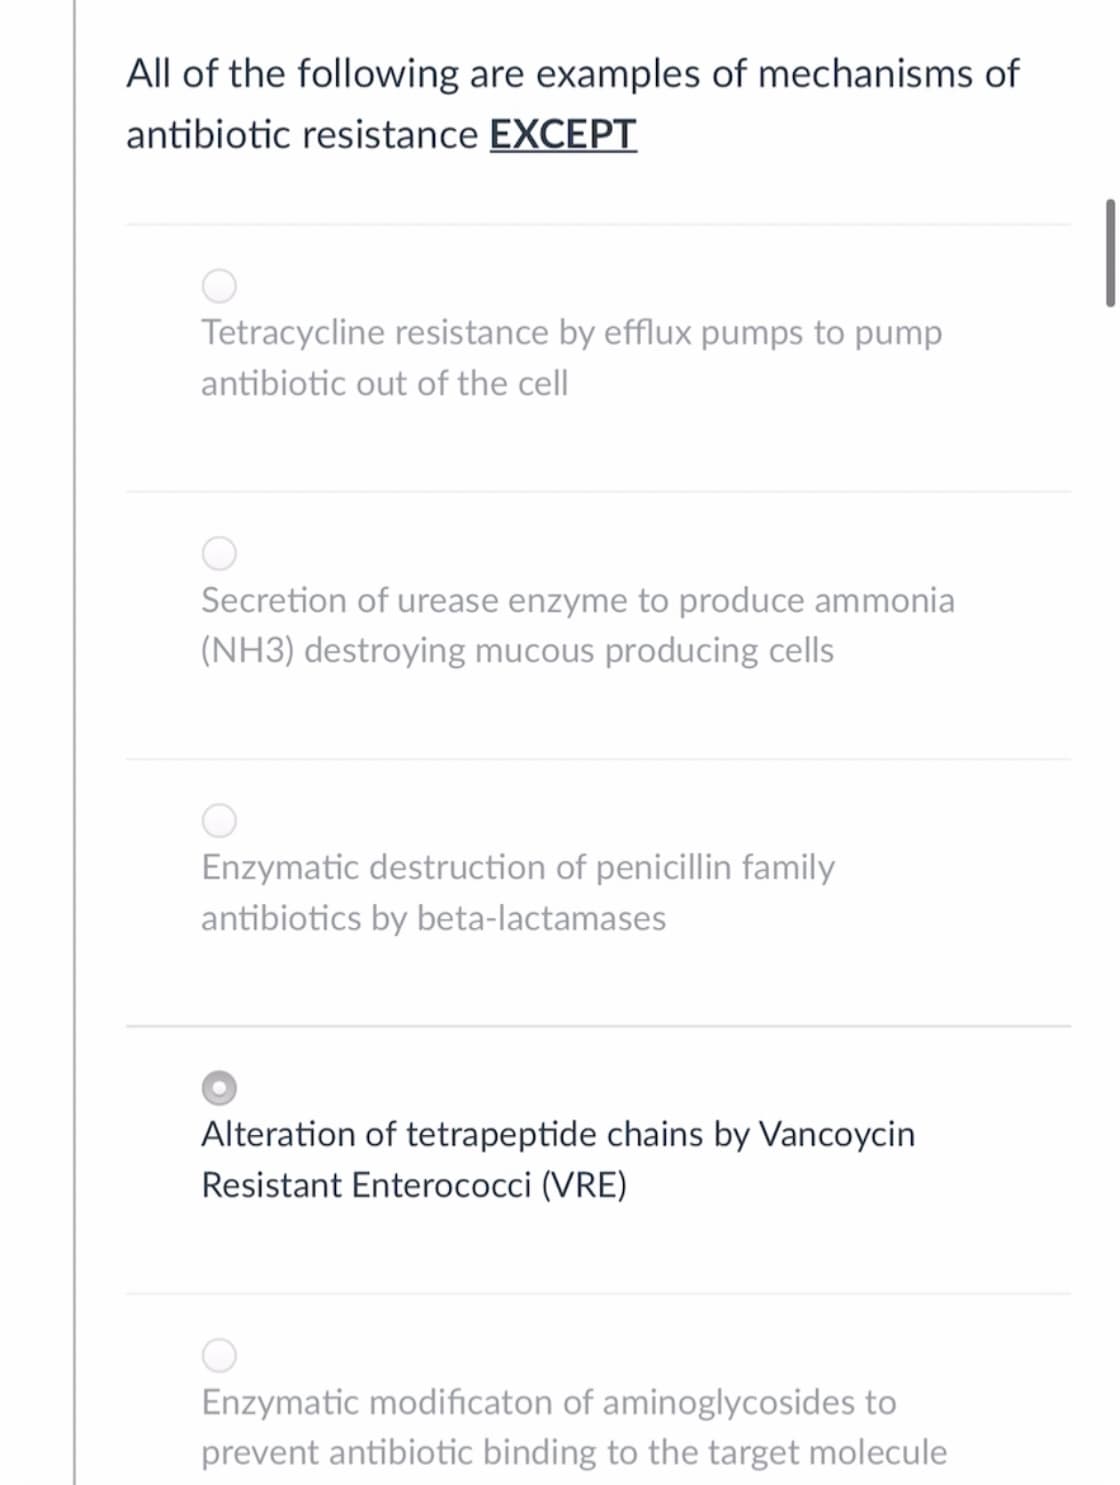 All of the following are examples of mechanisms of
antibiotic resistance EXCEPT
Tetracycline resistance by efflux pumps to pump
antibiotic out of the cell
Secretion of urease enzyme to produce ammonia
(NH3) destroying mucous producing cells
Enzymatic destruction of penicillin family
antibiotics by beta-lactamases
Alteration of tetrapeptide chains by Vancoycin
Resistant Enterococci (VRE)
Enzymatic modificaton of aminoglycosides to
prevent antibiotic binding to the target molecule
